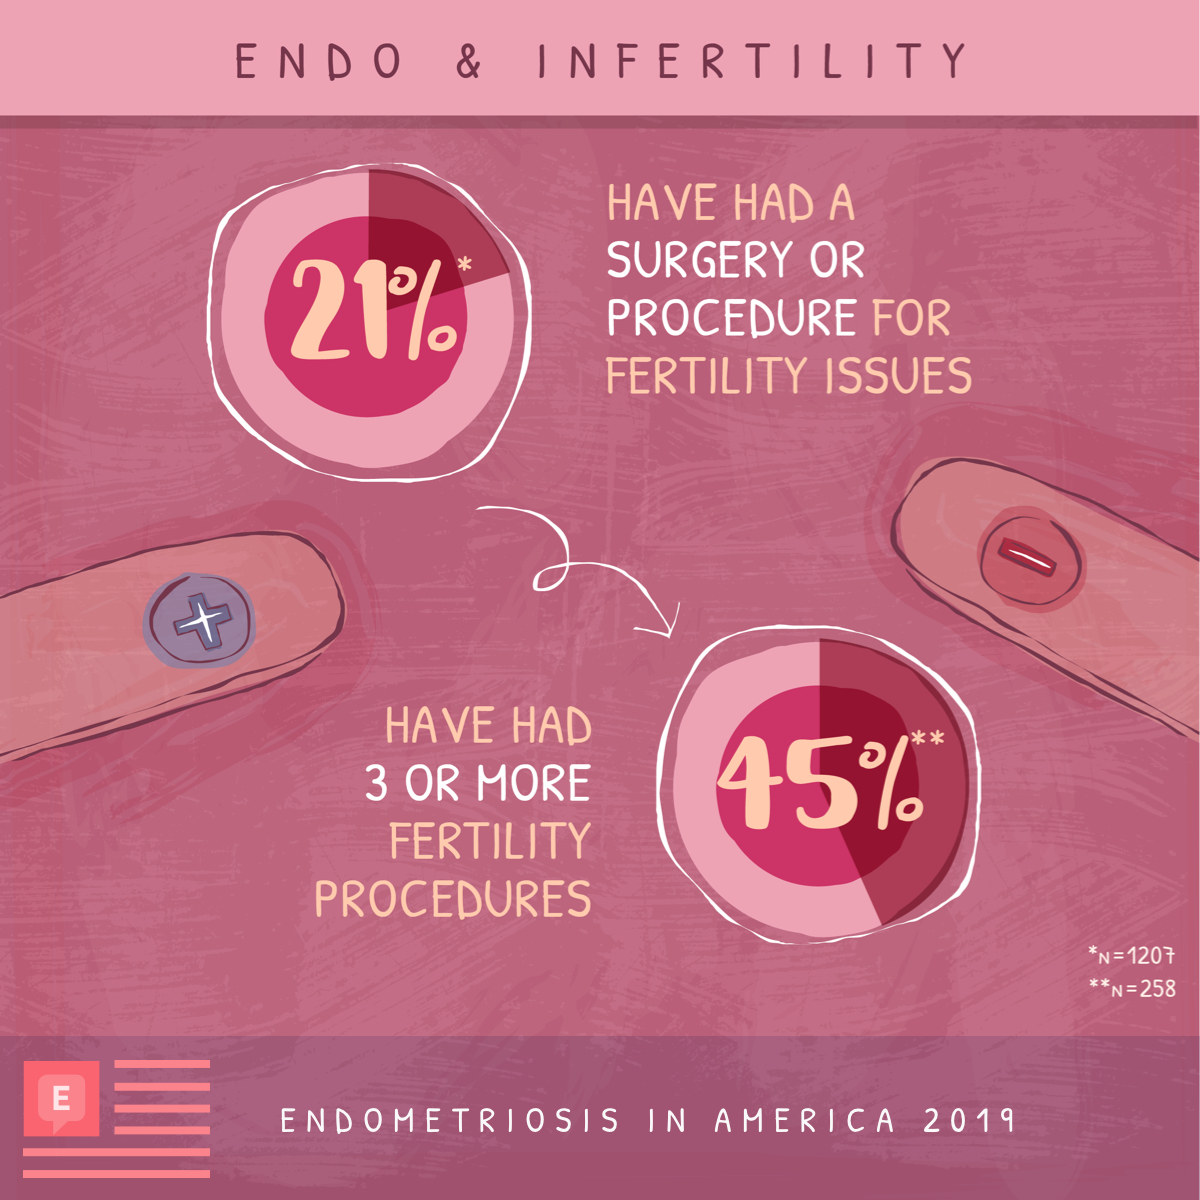 21% have had a surgery/procedure for fertility issues. 45% have had 3 or more fertility procedures.